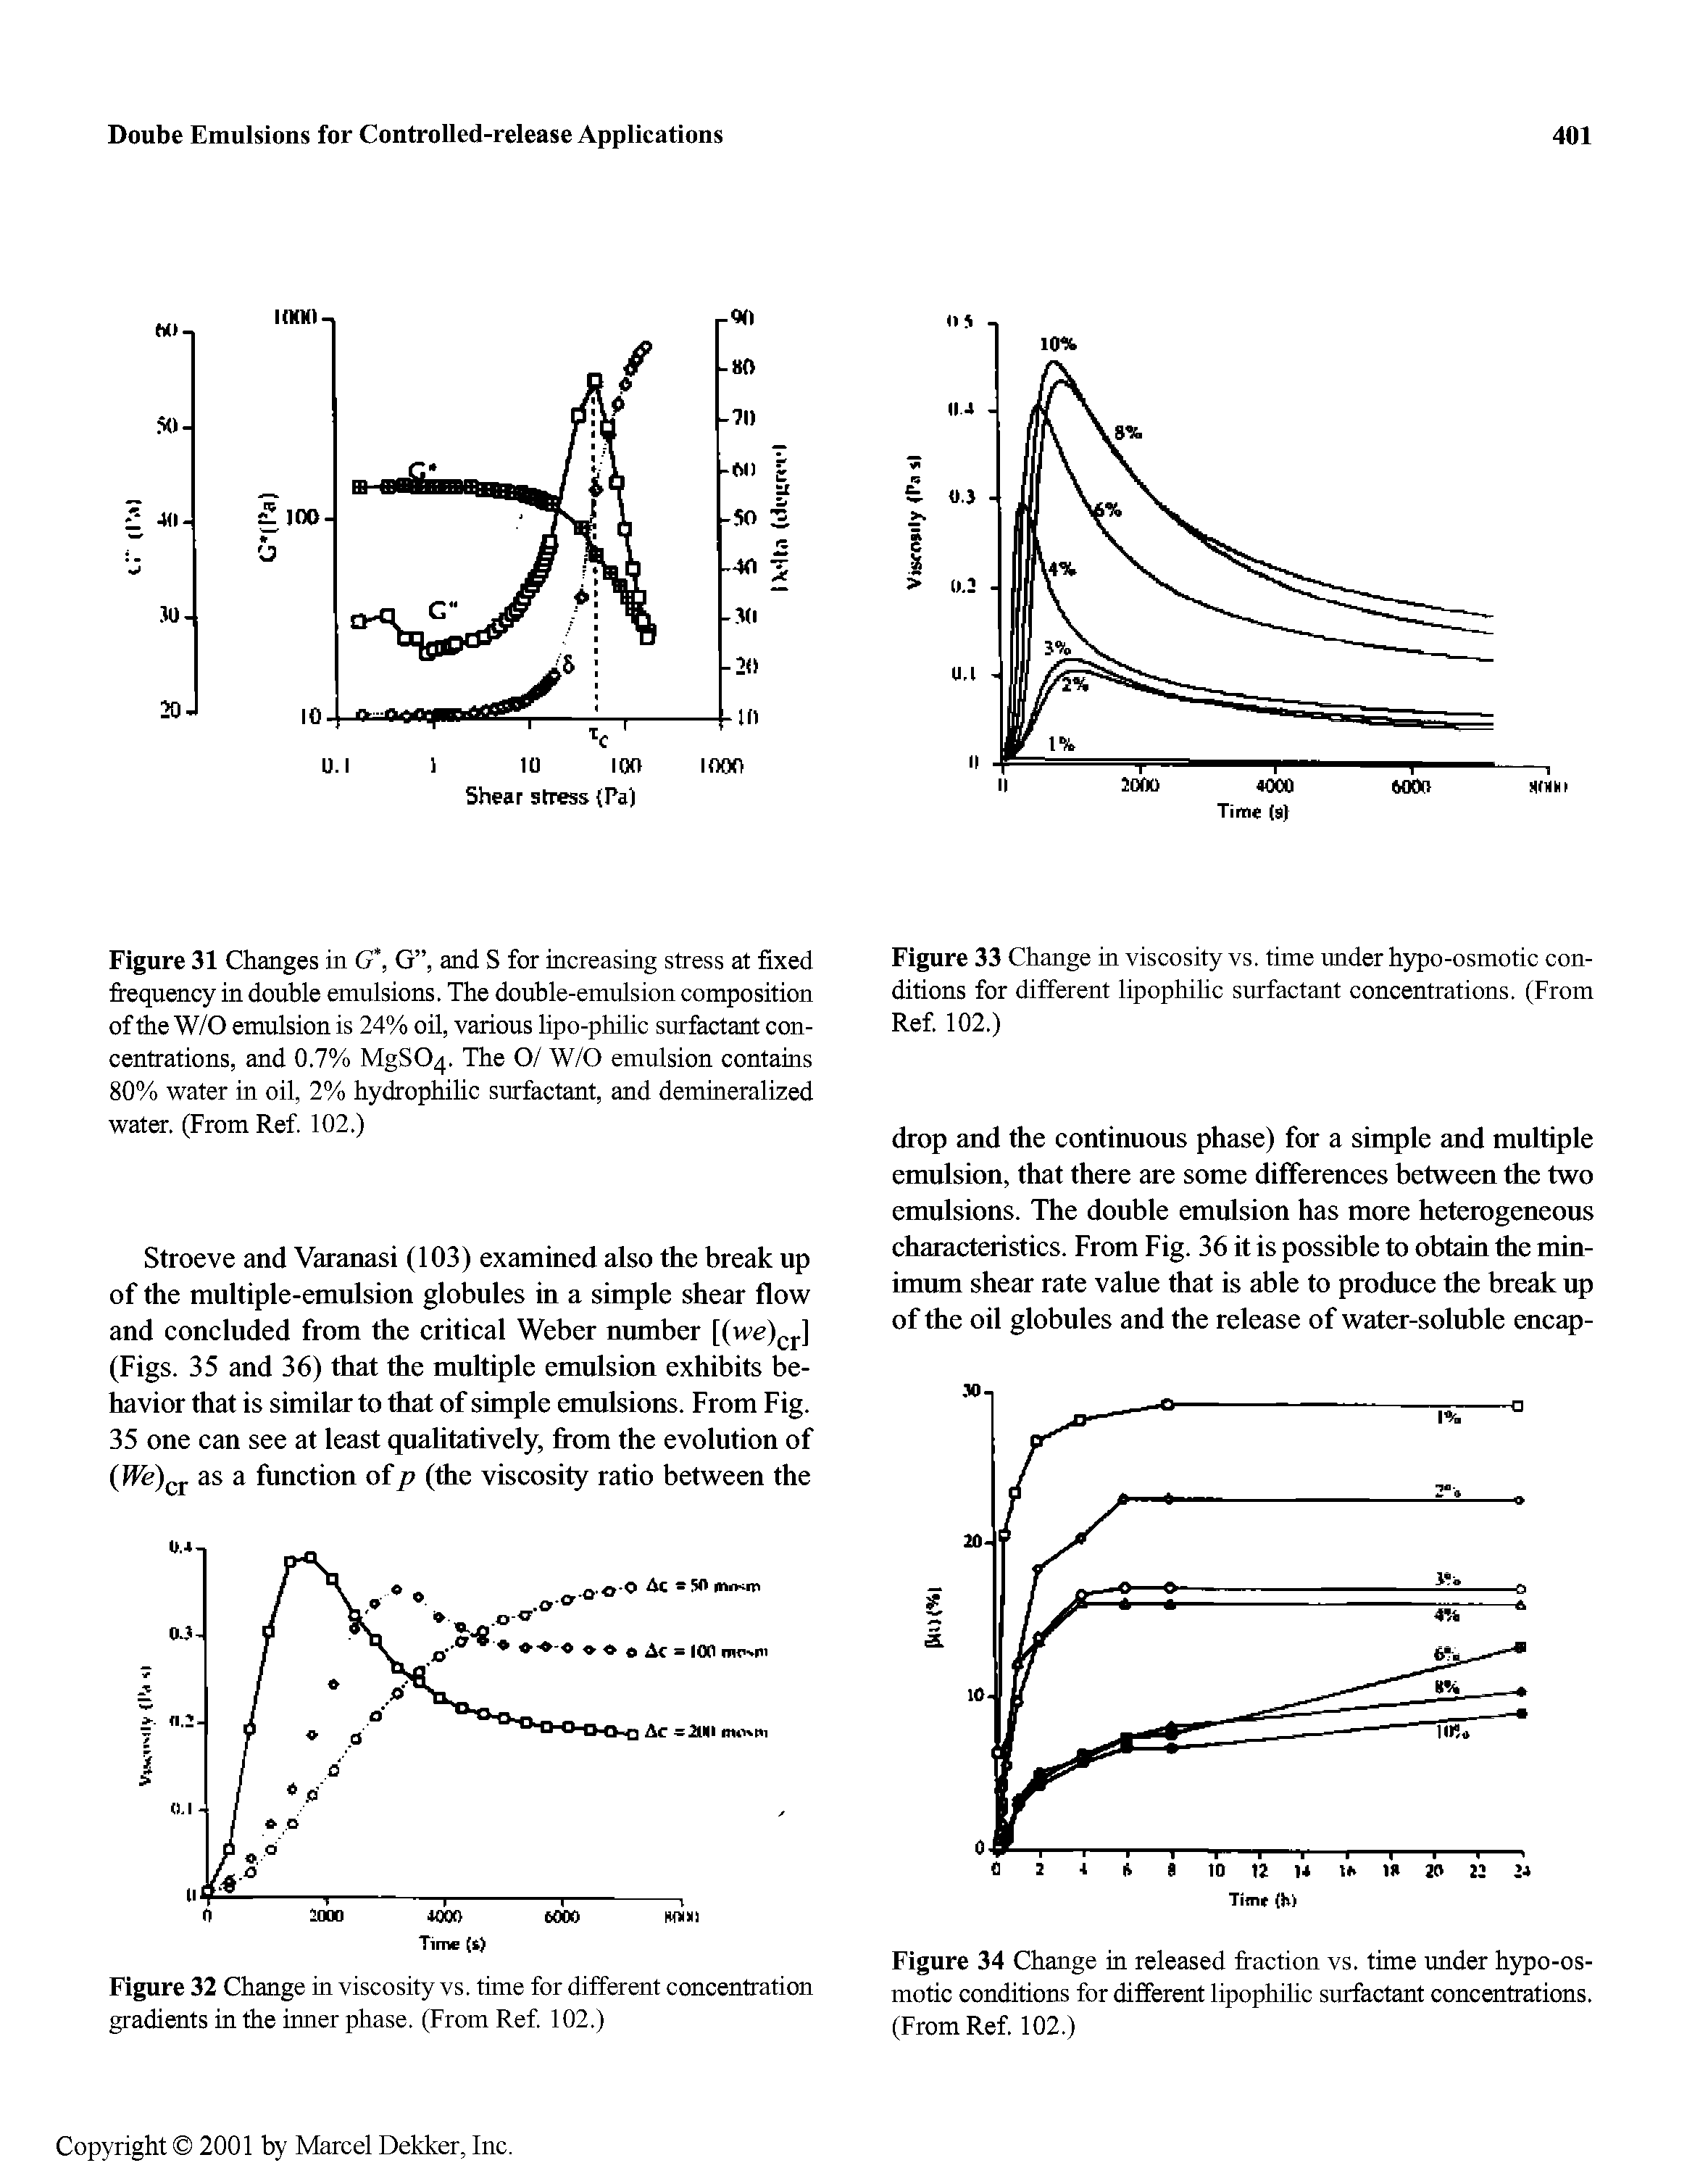 Figure 31 Changes in G G , and S for increasing stress at fixed frequency in double emulsions. The double-emulsion composition of the W/0 emulsion is 24% oil, various lipo-philic surfactant concentrations, and 0.7% MgSOq. The 0/ W/0 emulsion contains 80% water in oil, 2% hydrophilic surfactant, and demineralized water. (From Ref 102.)...